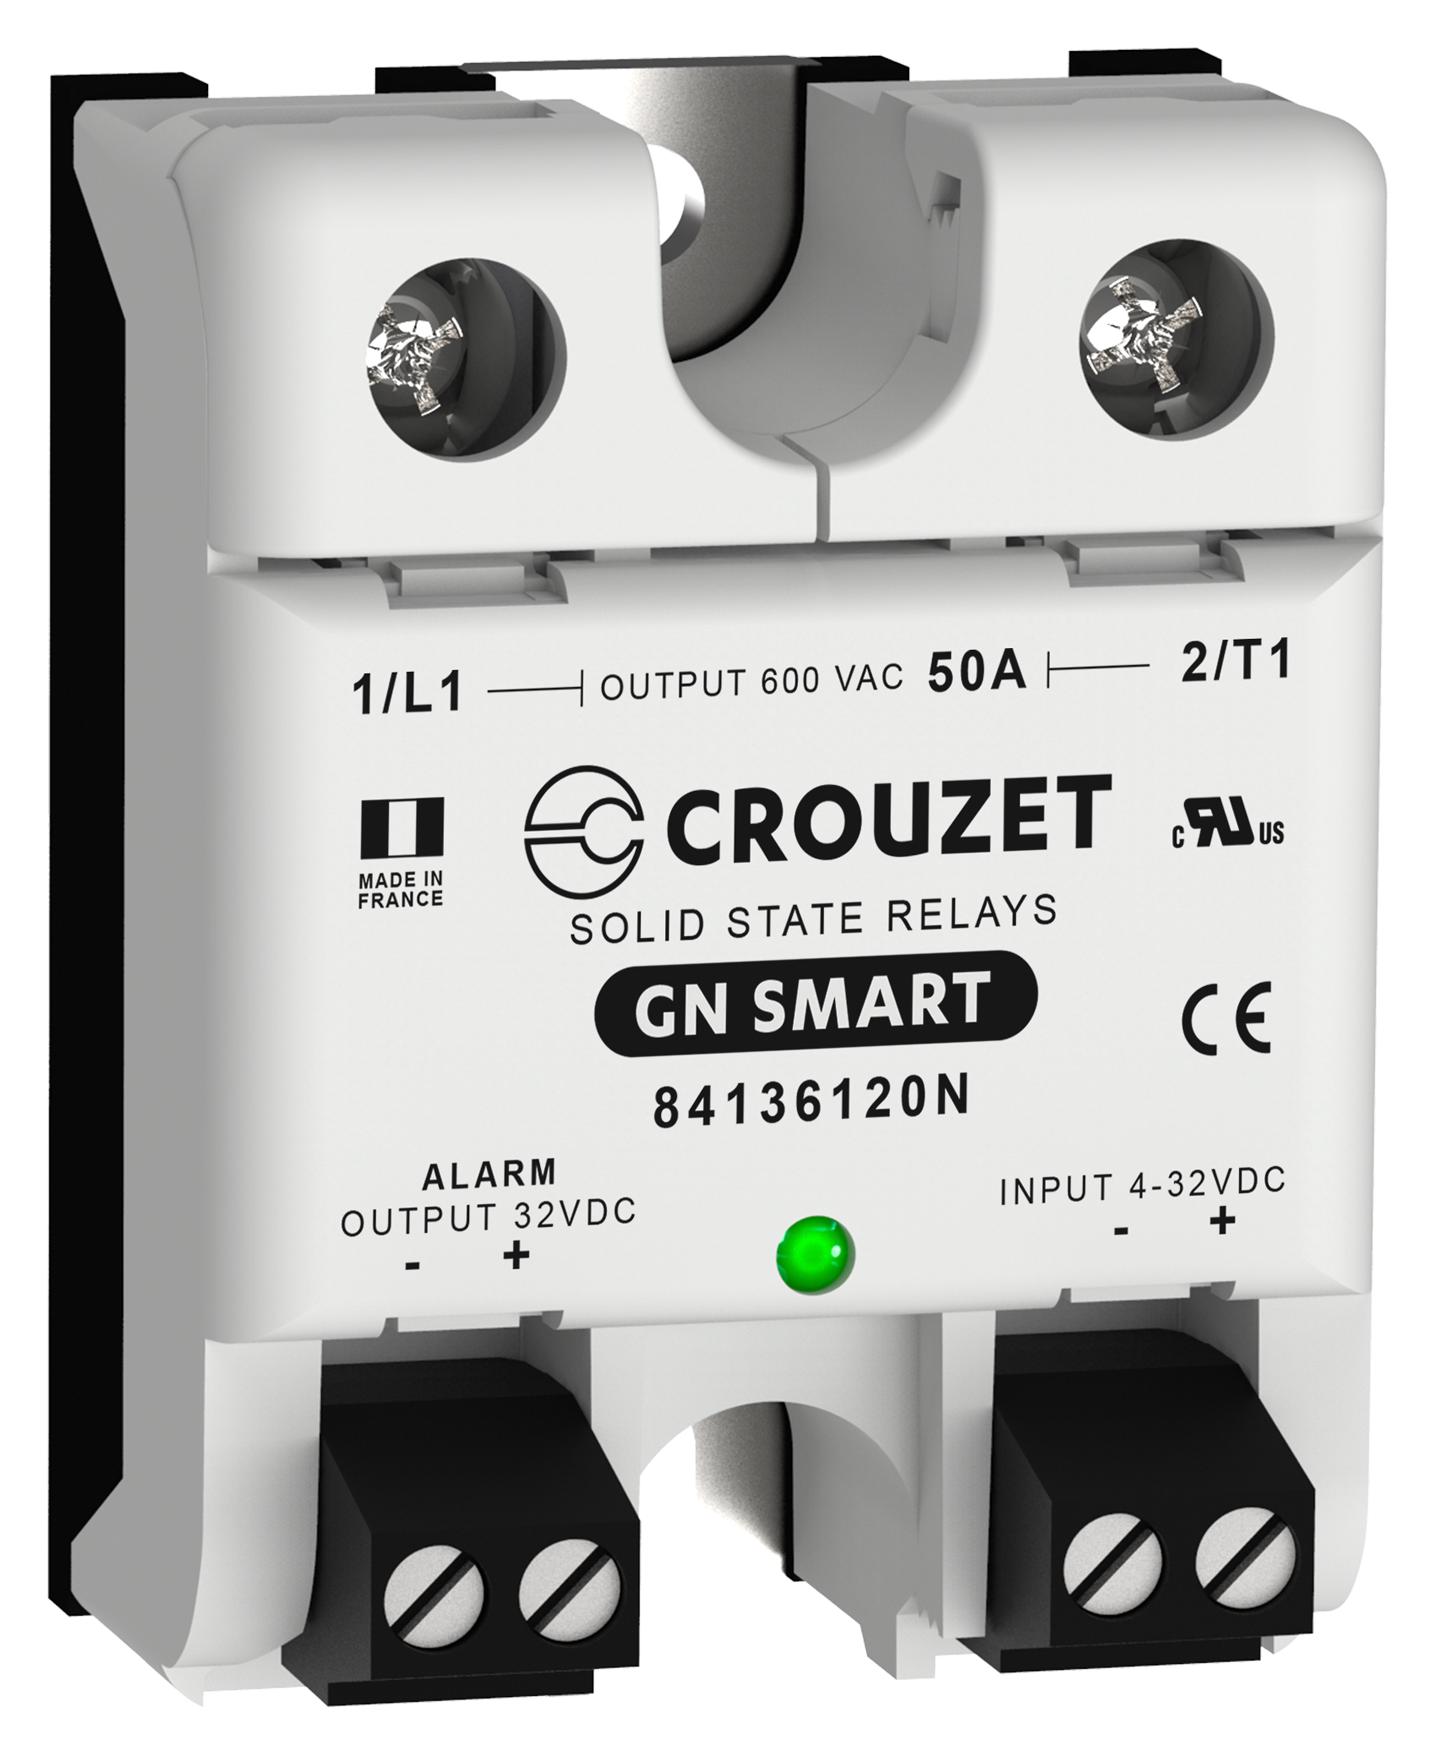 84136120N SOLID STATE RELAY, 50A, 24-600VAC, PANEL CROUZET